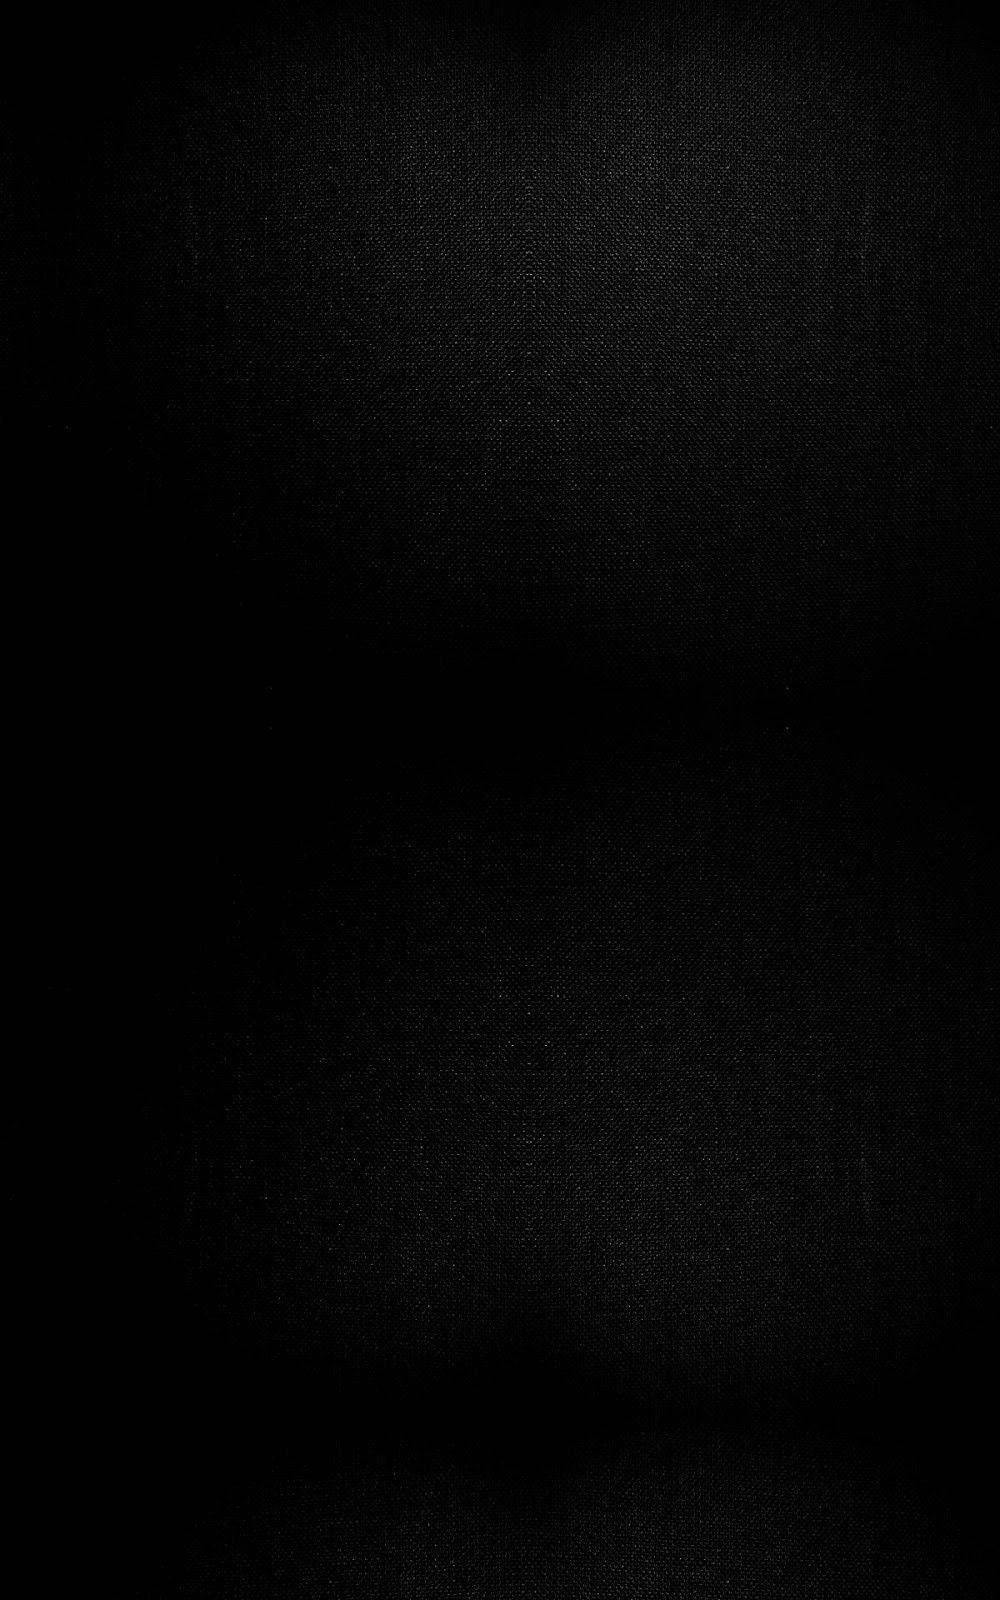 Woven Solid Black Iphone Wallpaper